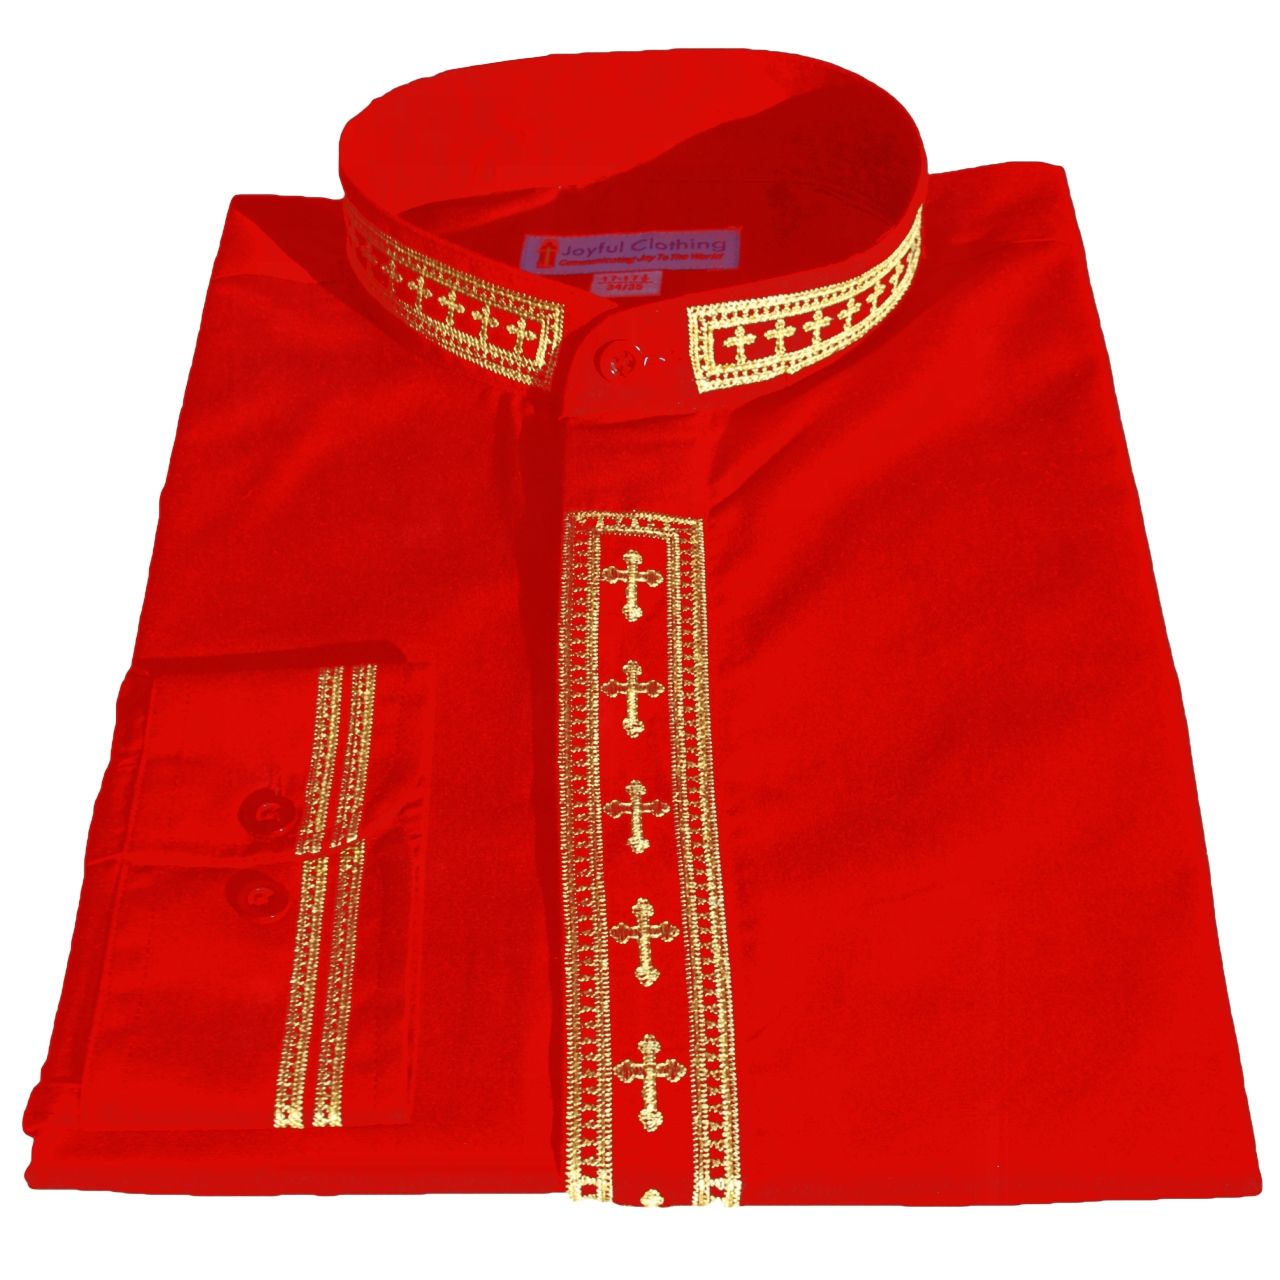 319. Men's Long-Sleeve Clergy Shirt With Fine Embroidery - Red/Gold